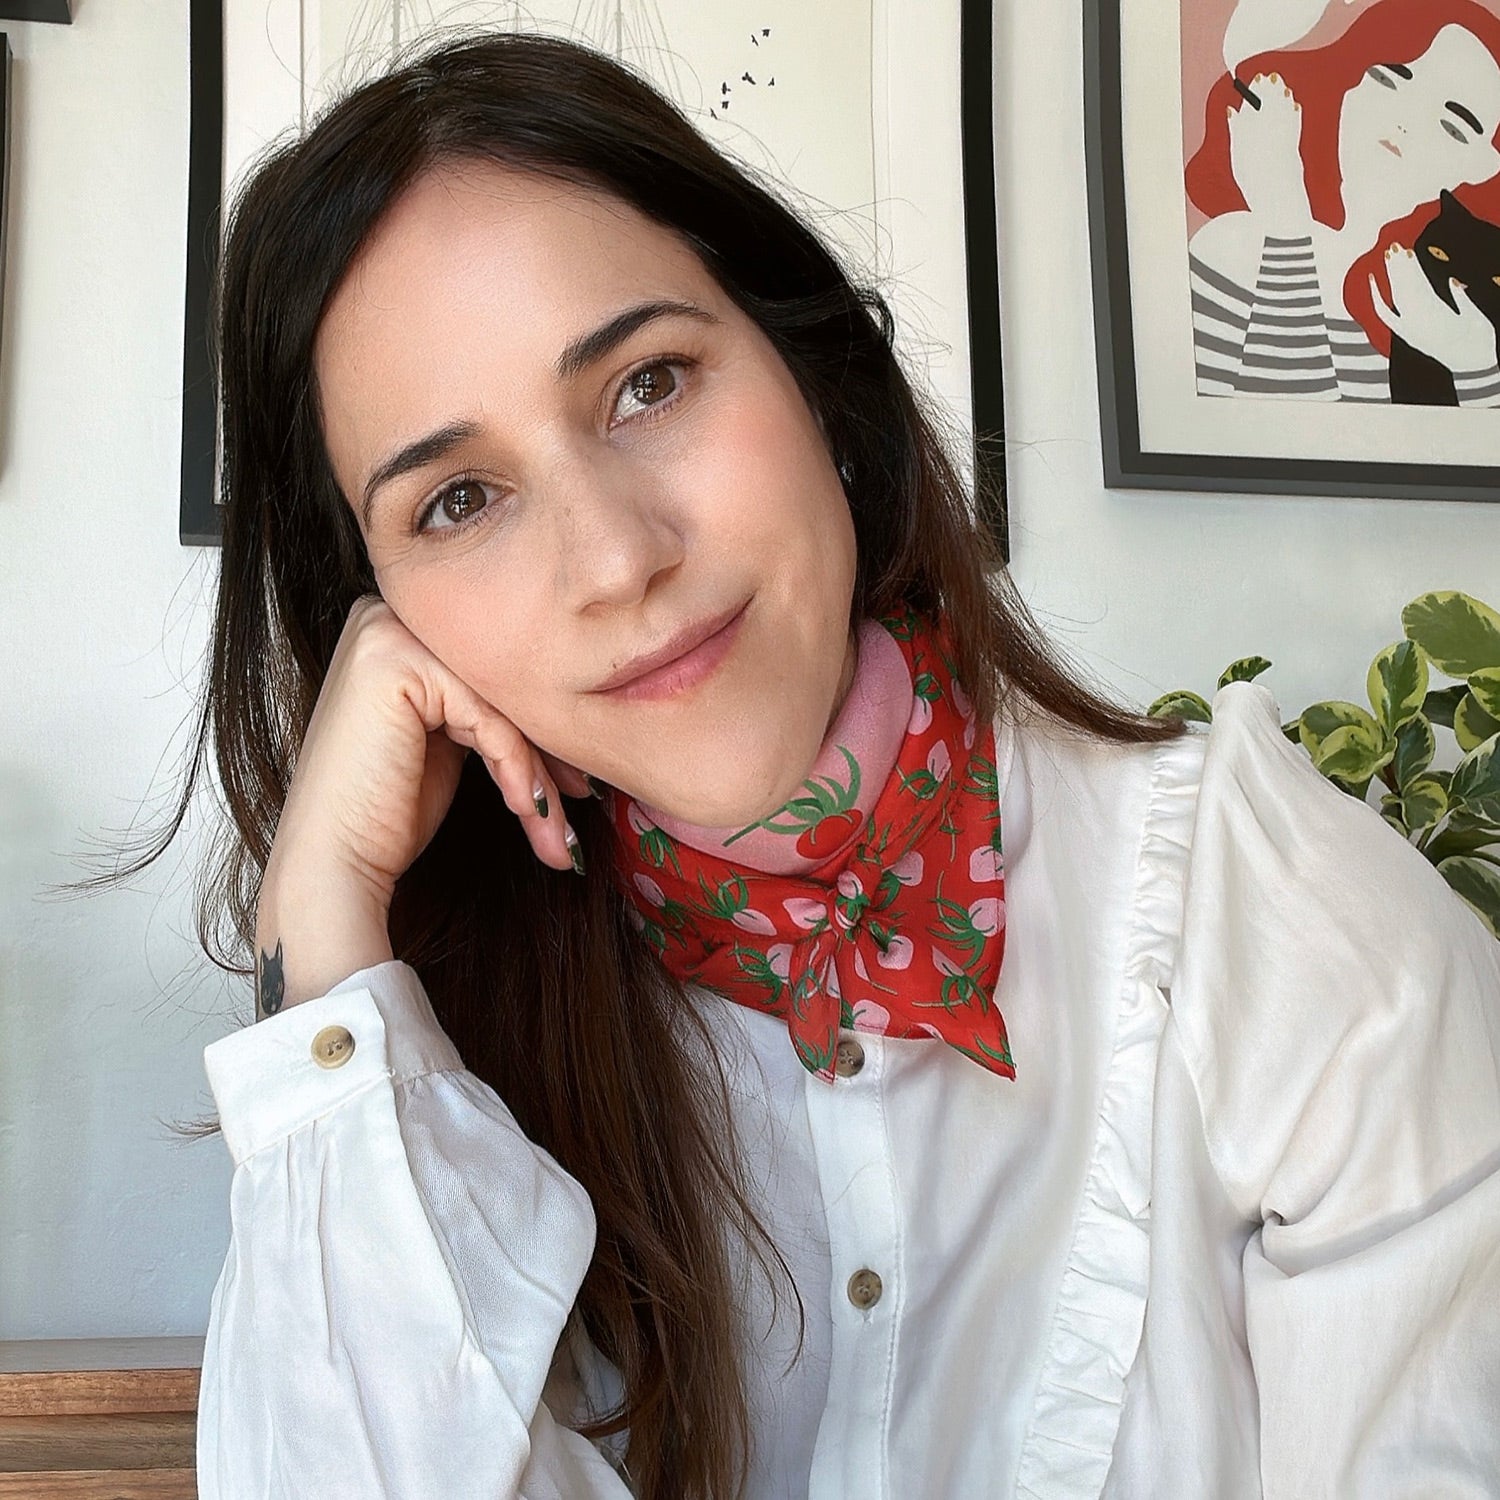 cristina, centinelle's founder and designer at studio, wearing Tomatoes cotton silk bandana in red and pink